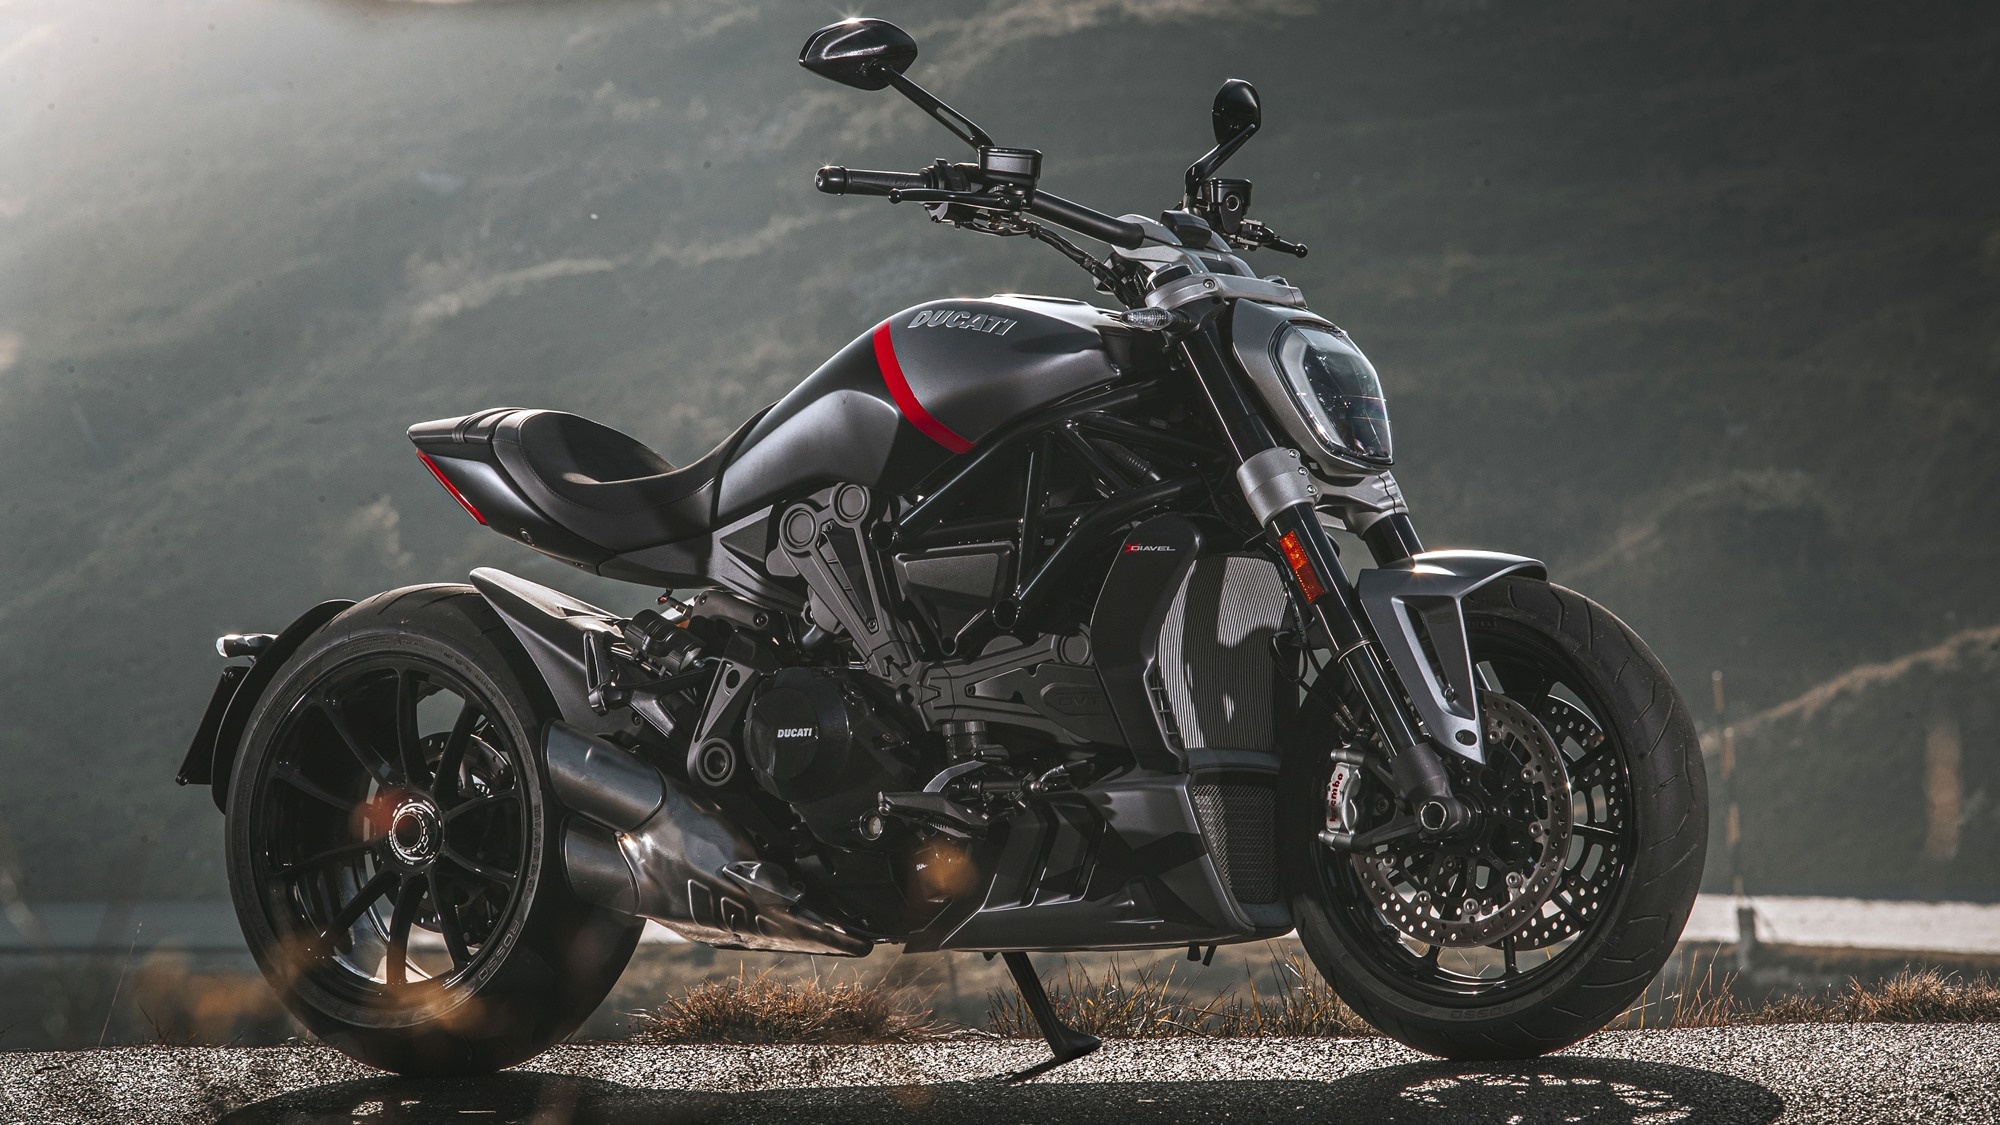 Ducati XDiavel, Black Star edition, Limited production, Exquisite styling, 2000x1130 HD Desktop